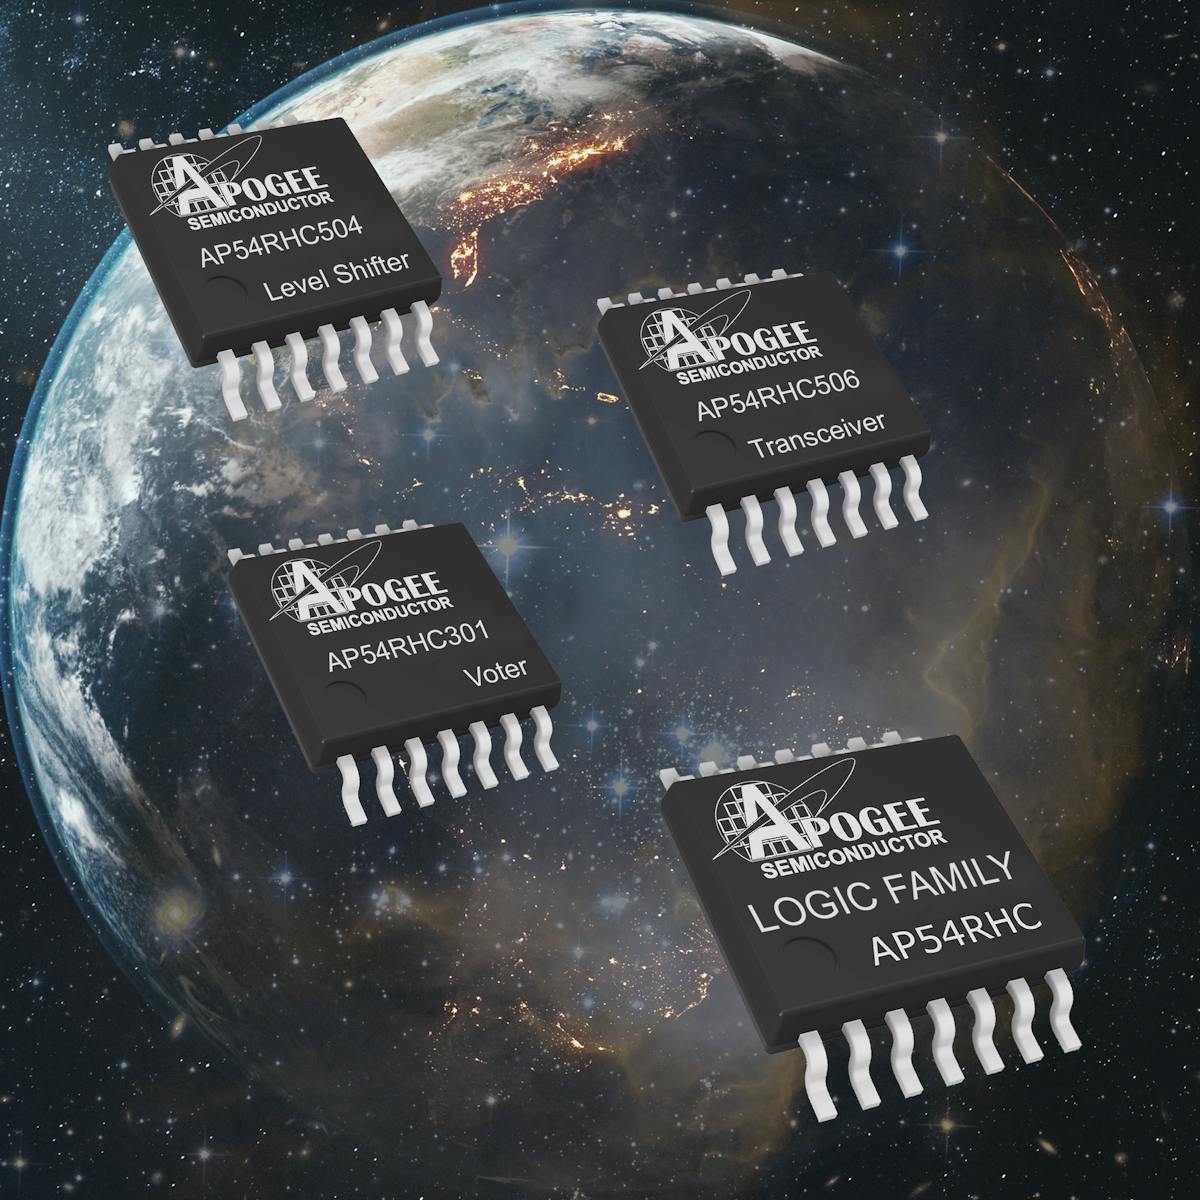 Apogee Semiconductor offers radiation-hardened integrated circuits in several plastic-packaged flows to meet a variety of space mission profiles.